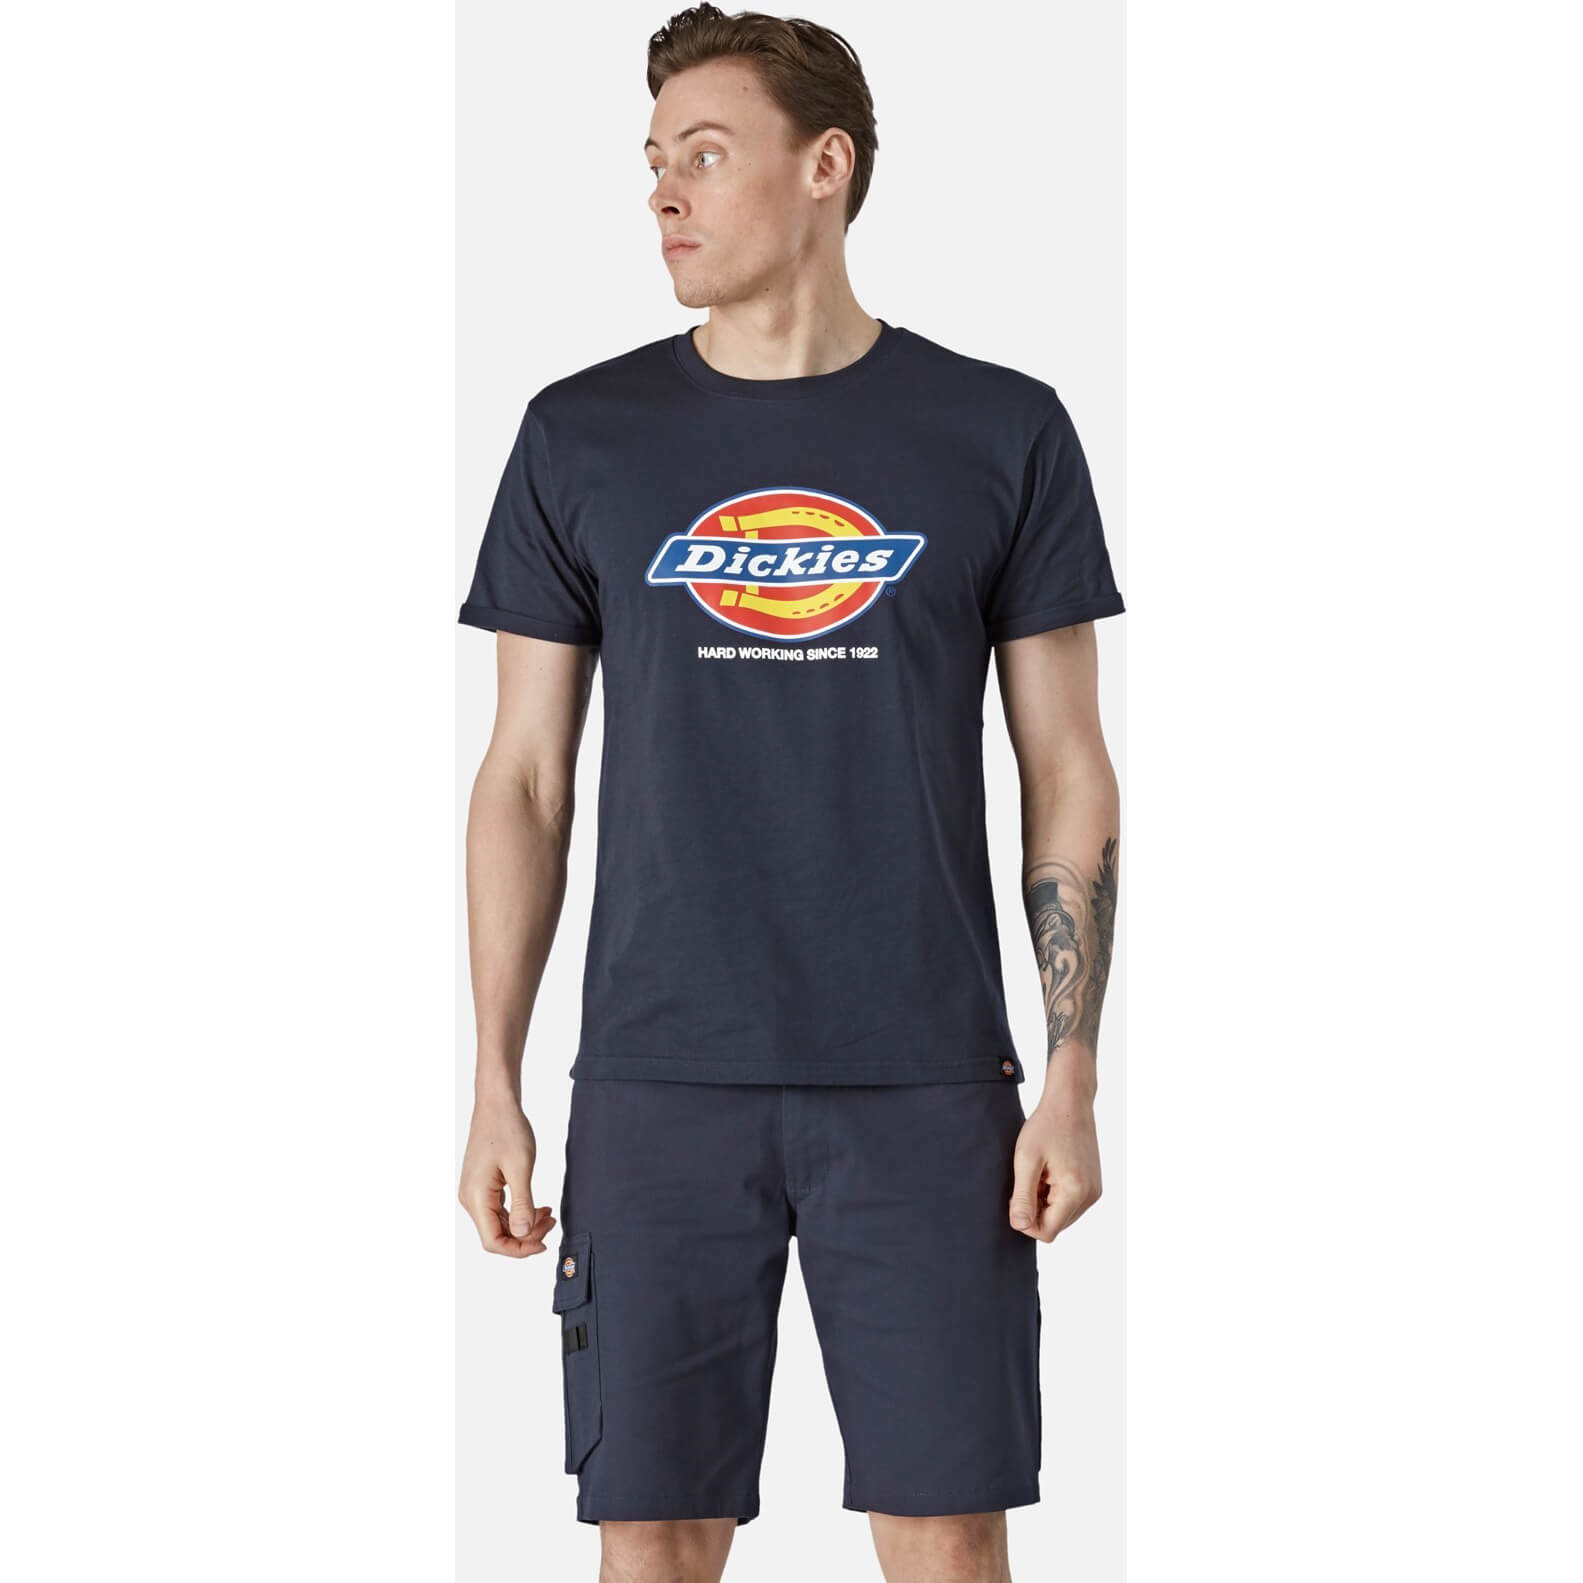 Image of Dickies Denison T Shirt Navy Blue S